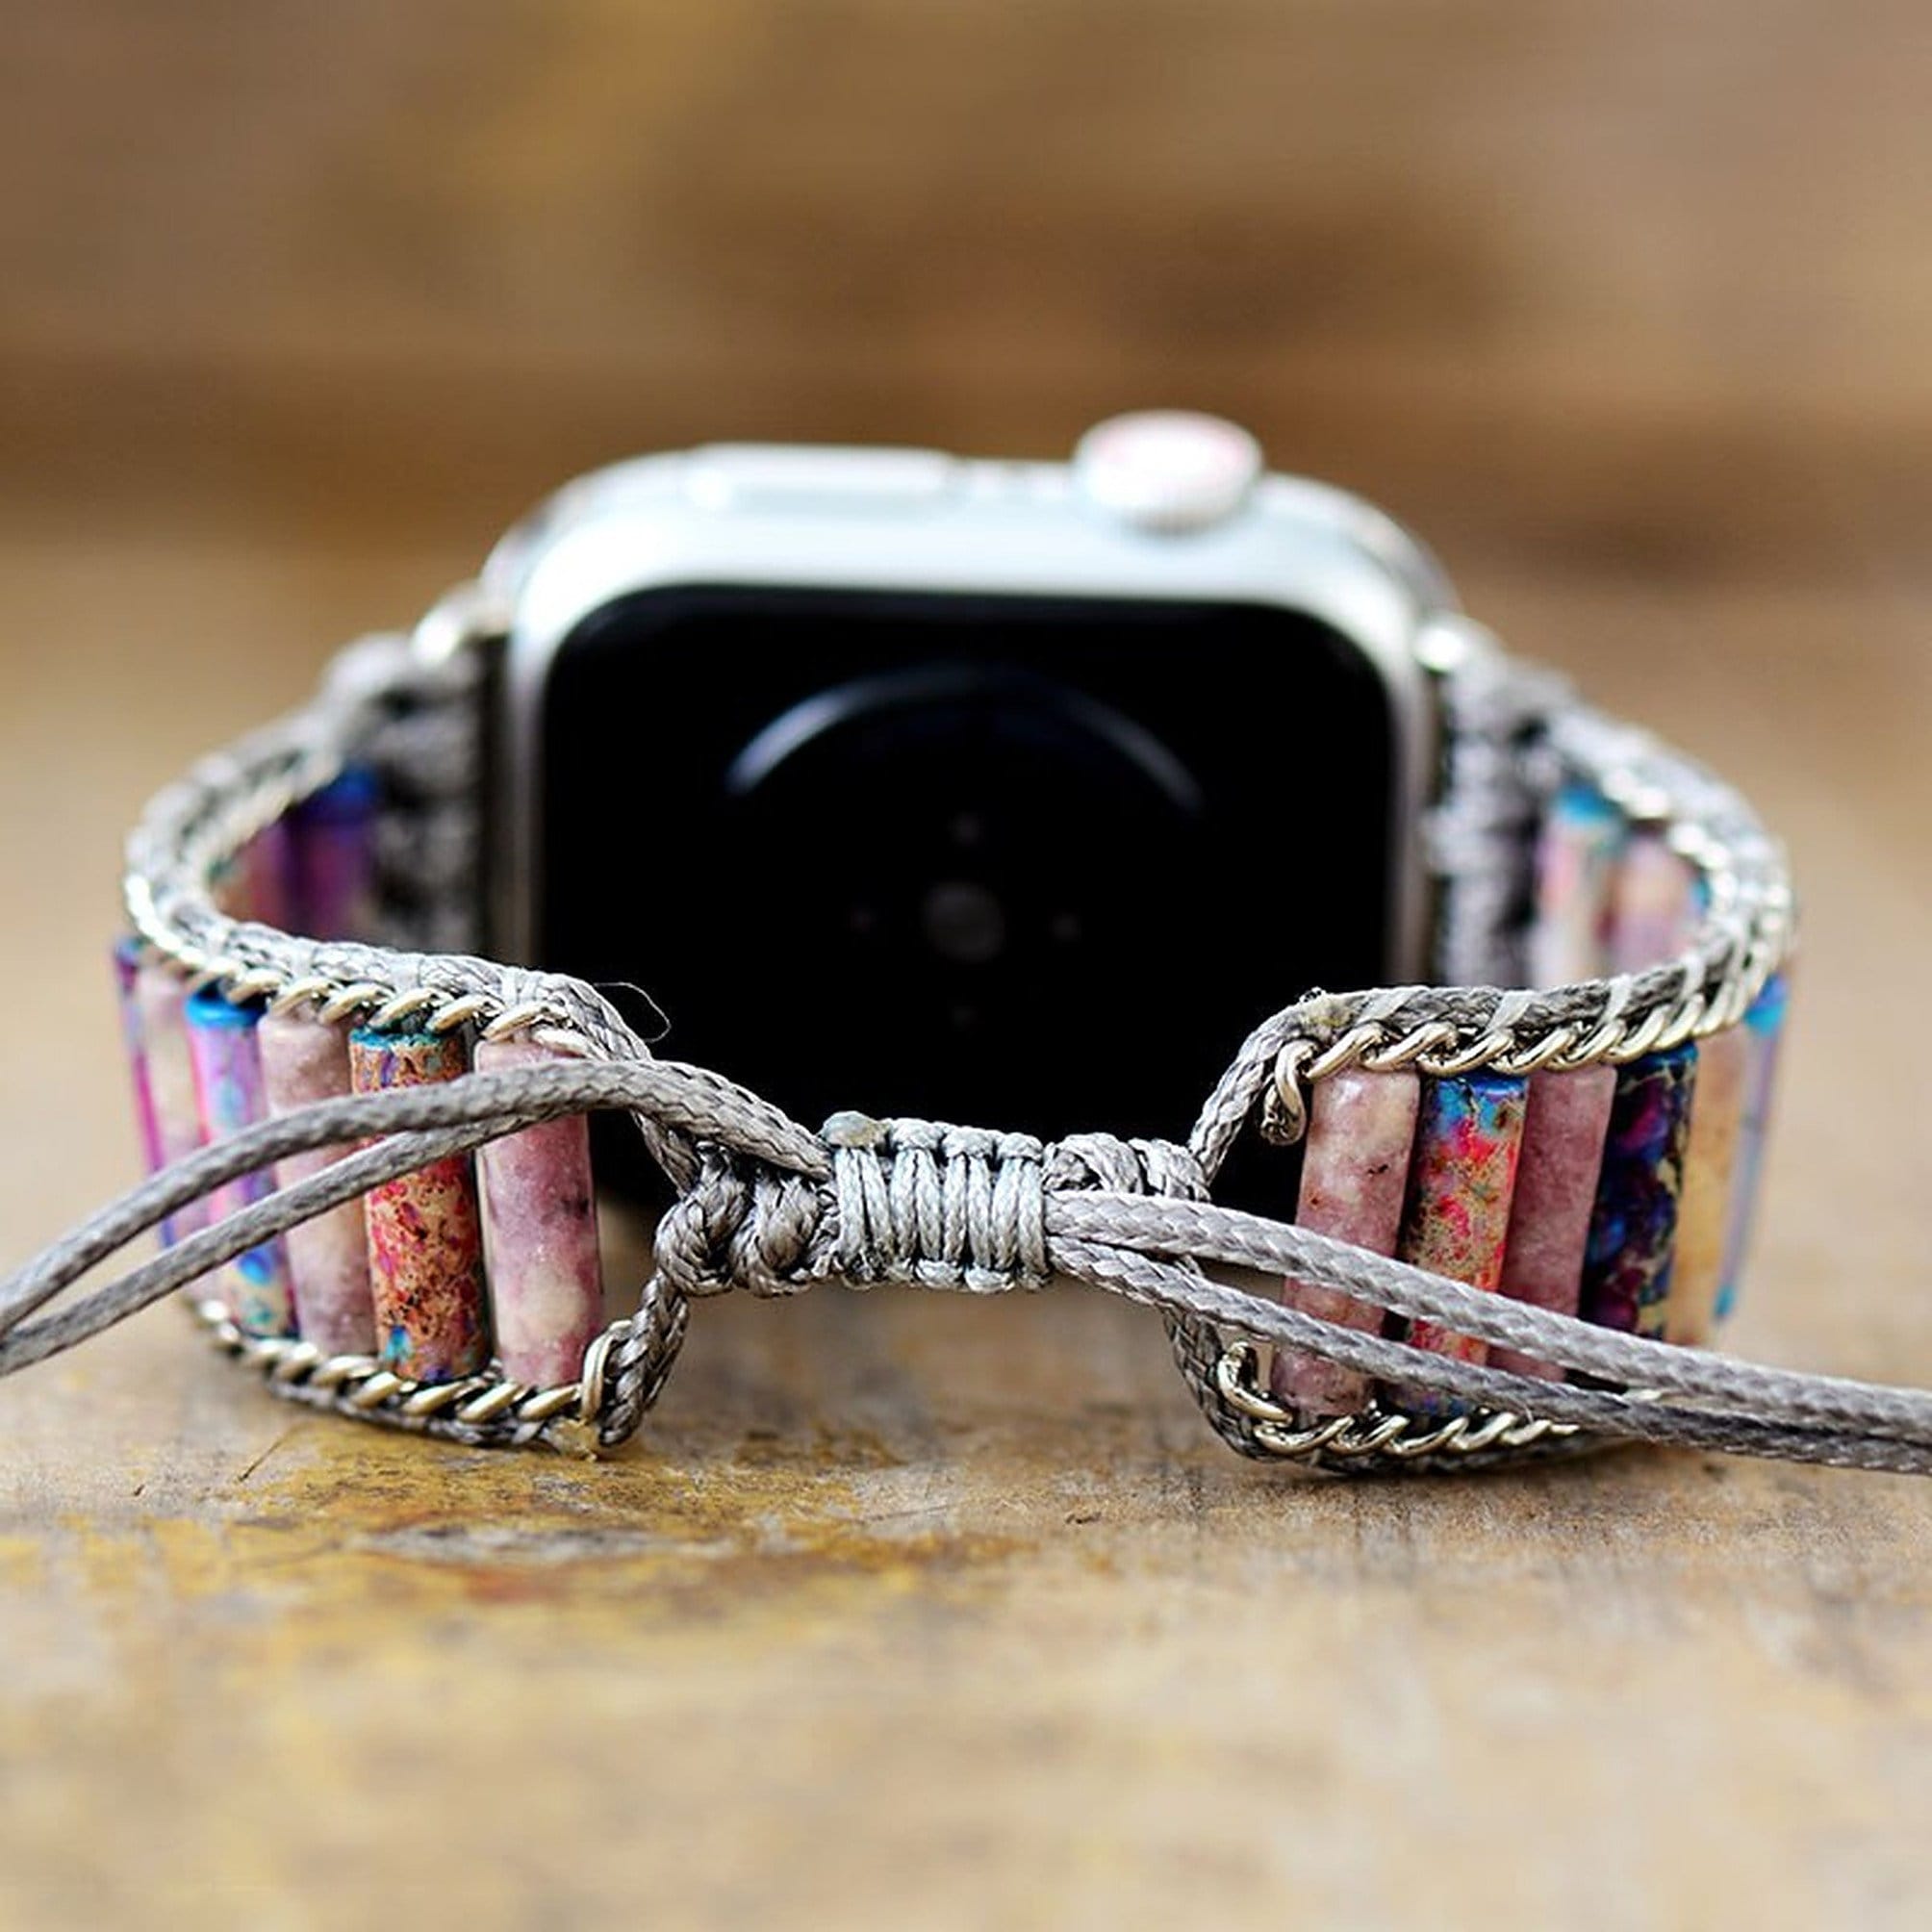 Apple Watch Band, Purple Clay Beads Bangle Design, Fits All Versions of  Apple Watch, Elastic, Clay Beads and Cloth 